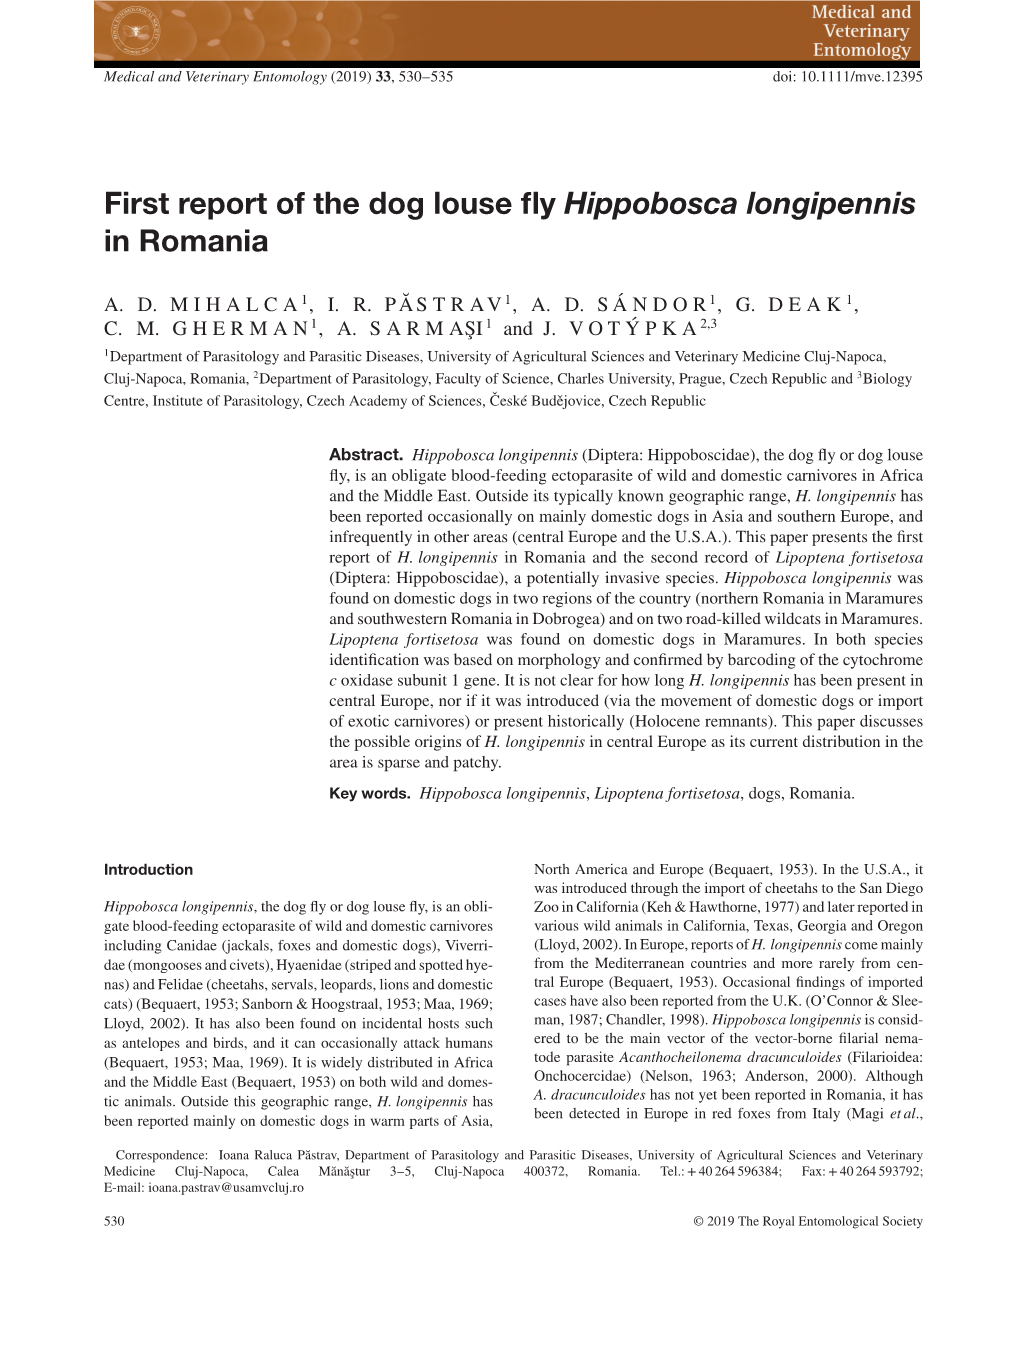 First Report of the Dog Louse Fly Hippobosca Longipennis in Romania